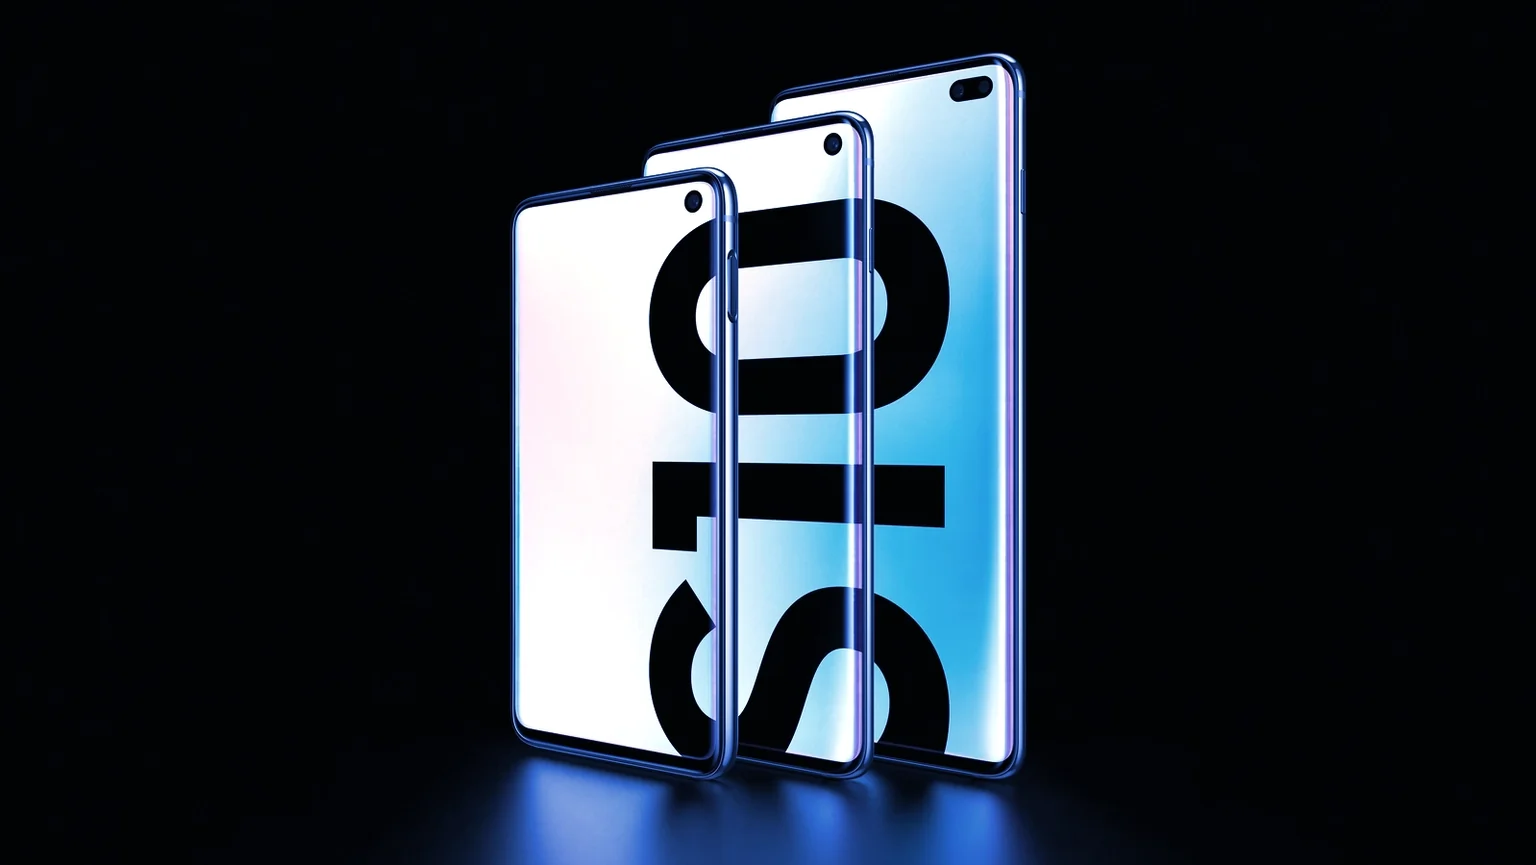 The Samsung Galaxy S10 has just launched but its cryptocurrency features aren't available to all. 